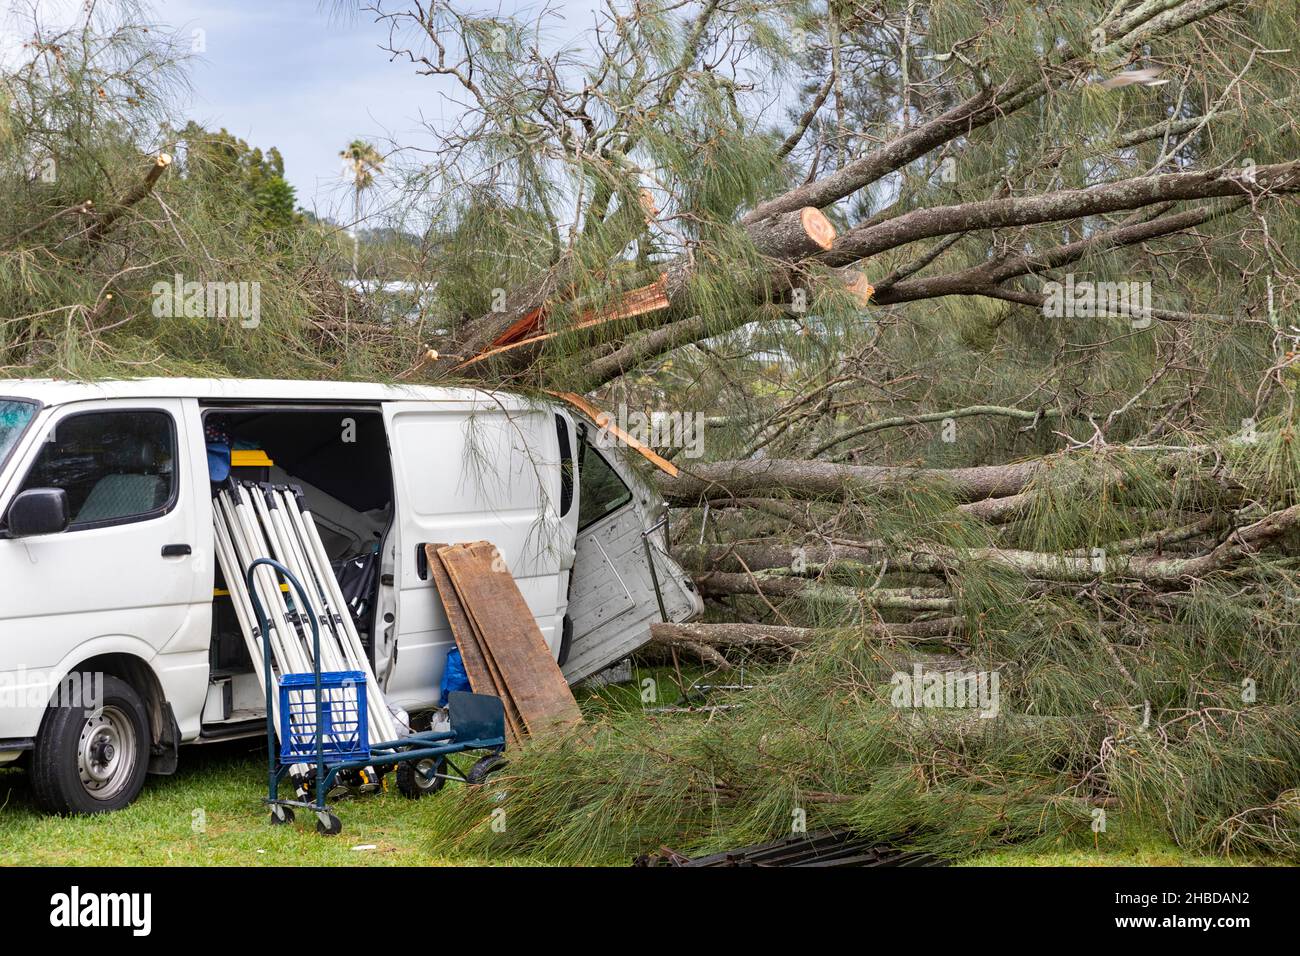 Narrabeen, Sydney, Australia. 19th Dec, 2021. Freak storm brought down trees and power lines on Sydney's northern beaches, one lady has died and others are critical, emergency services attended and plain clothes personnel at the scene of the fallen tree that killed a lady near Narrabeen Surf Club. Credit: martin berry/Alamy Live News Stock Photo